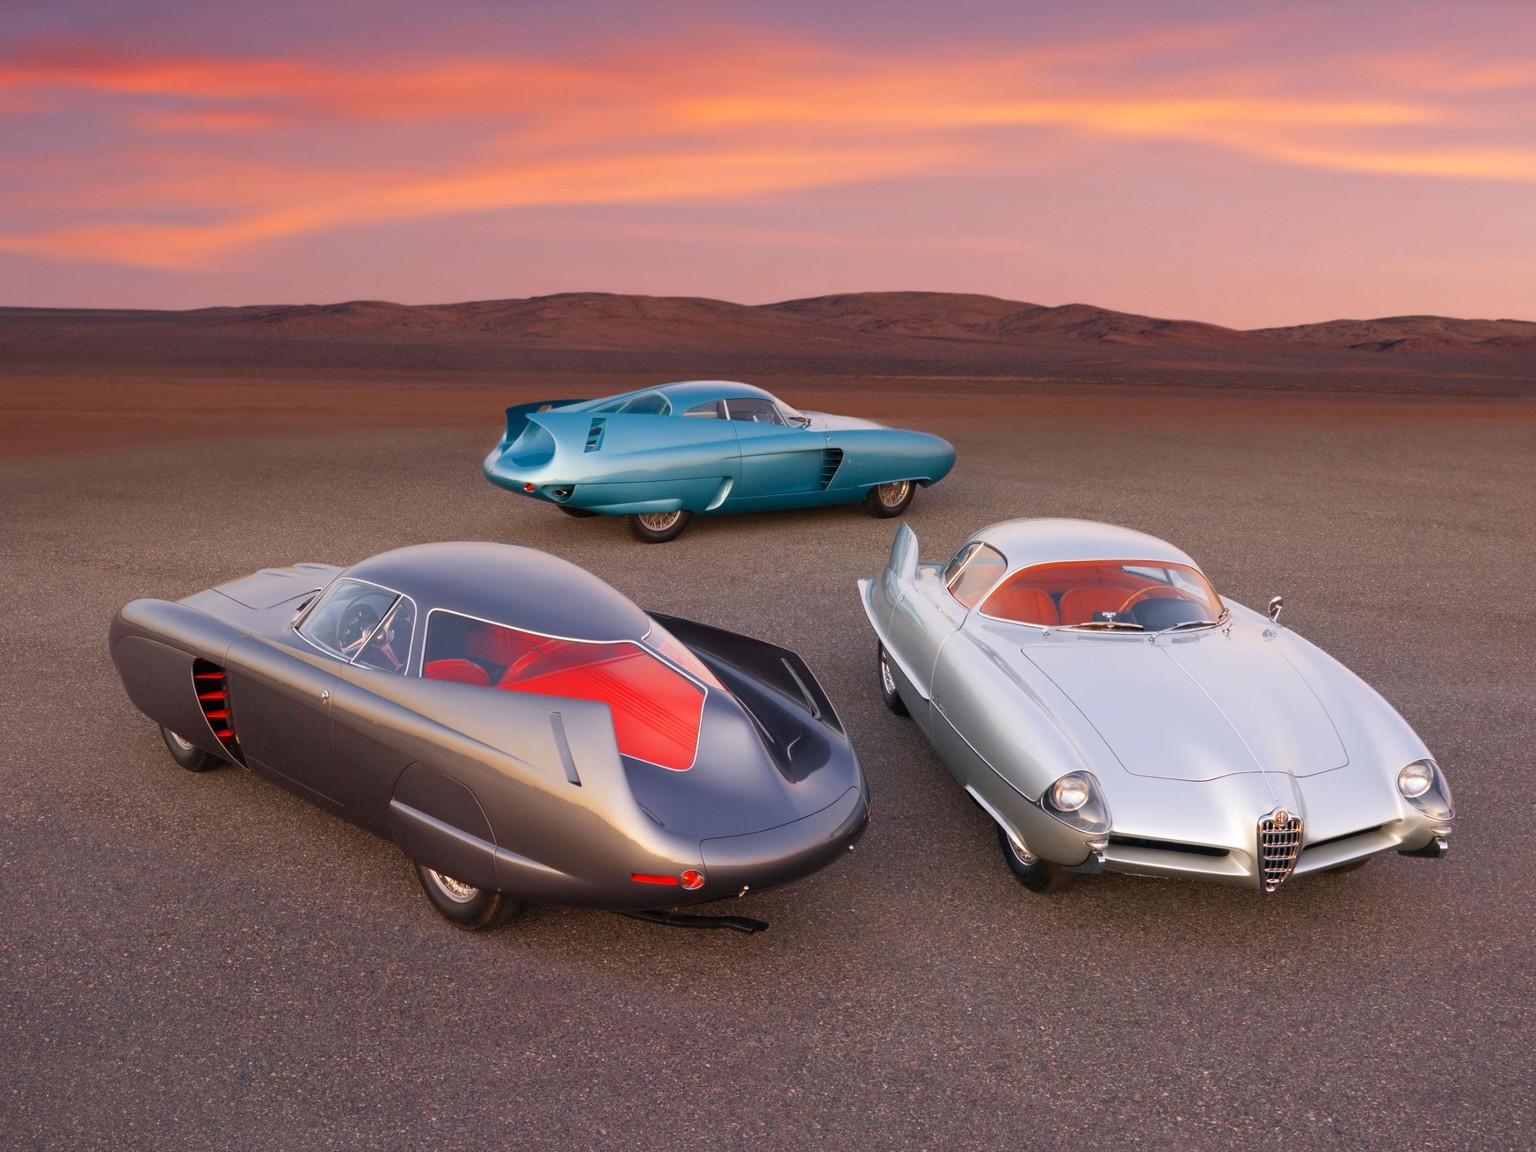 BAT cars alfa romeo Berlina Aerodinamica Tecnica (B.A.T.) concept vehicles, designed by Franco Scaglione and produced by the coachbuilder Bertone — will be part of Sotheby’s upcoming contemporary art  ...